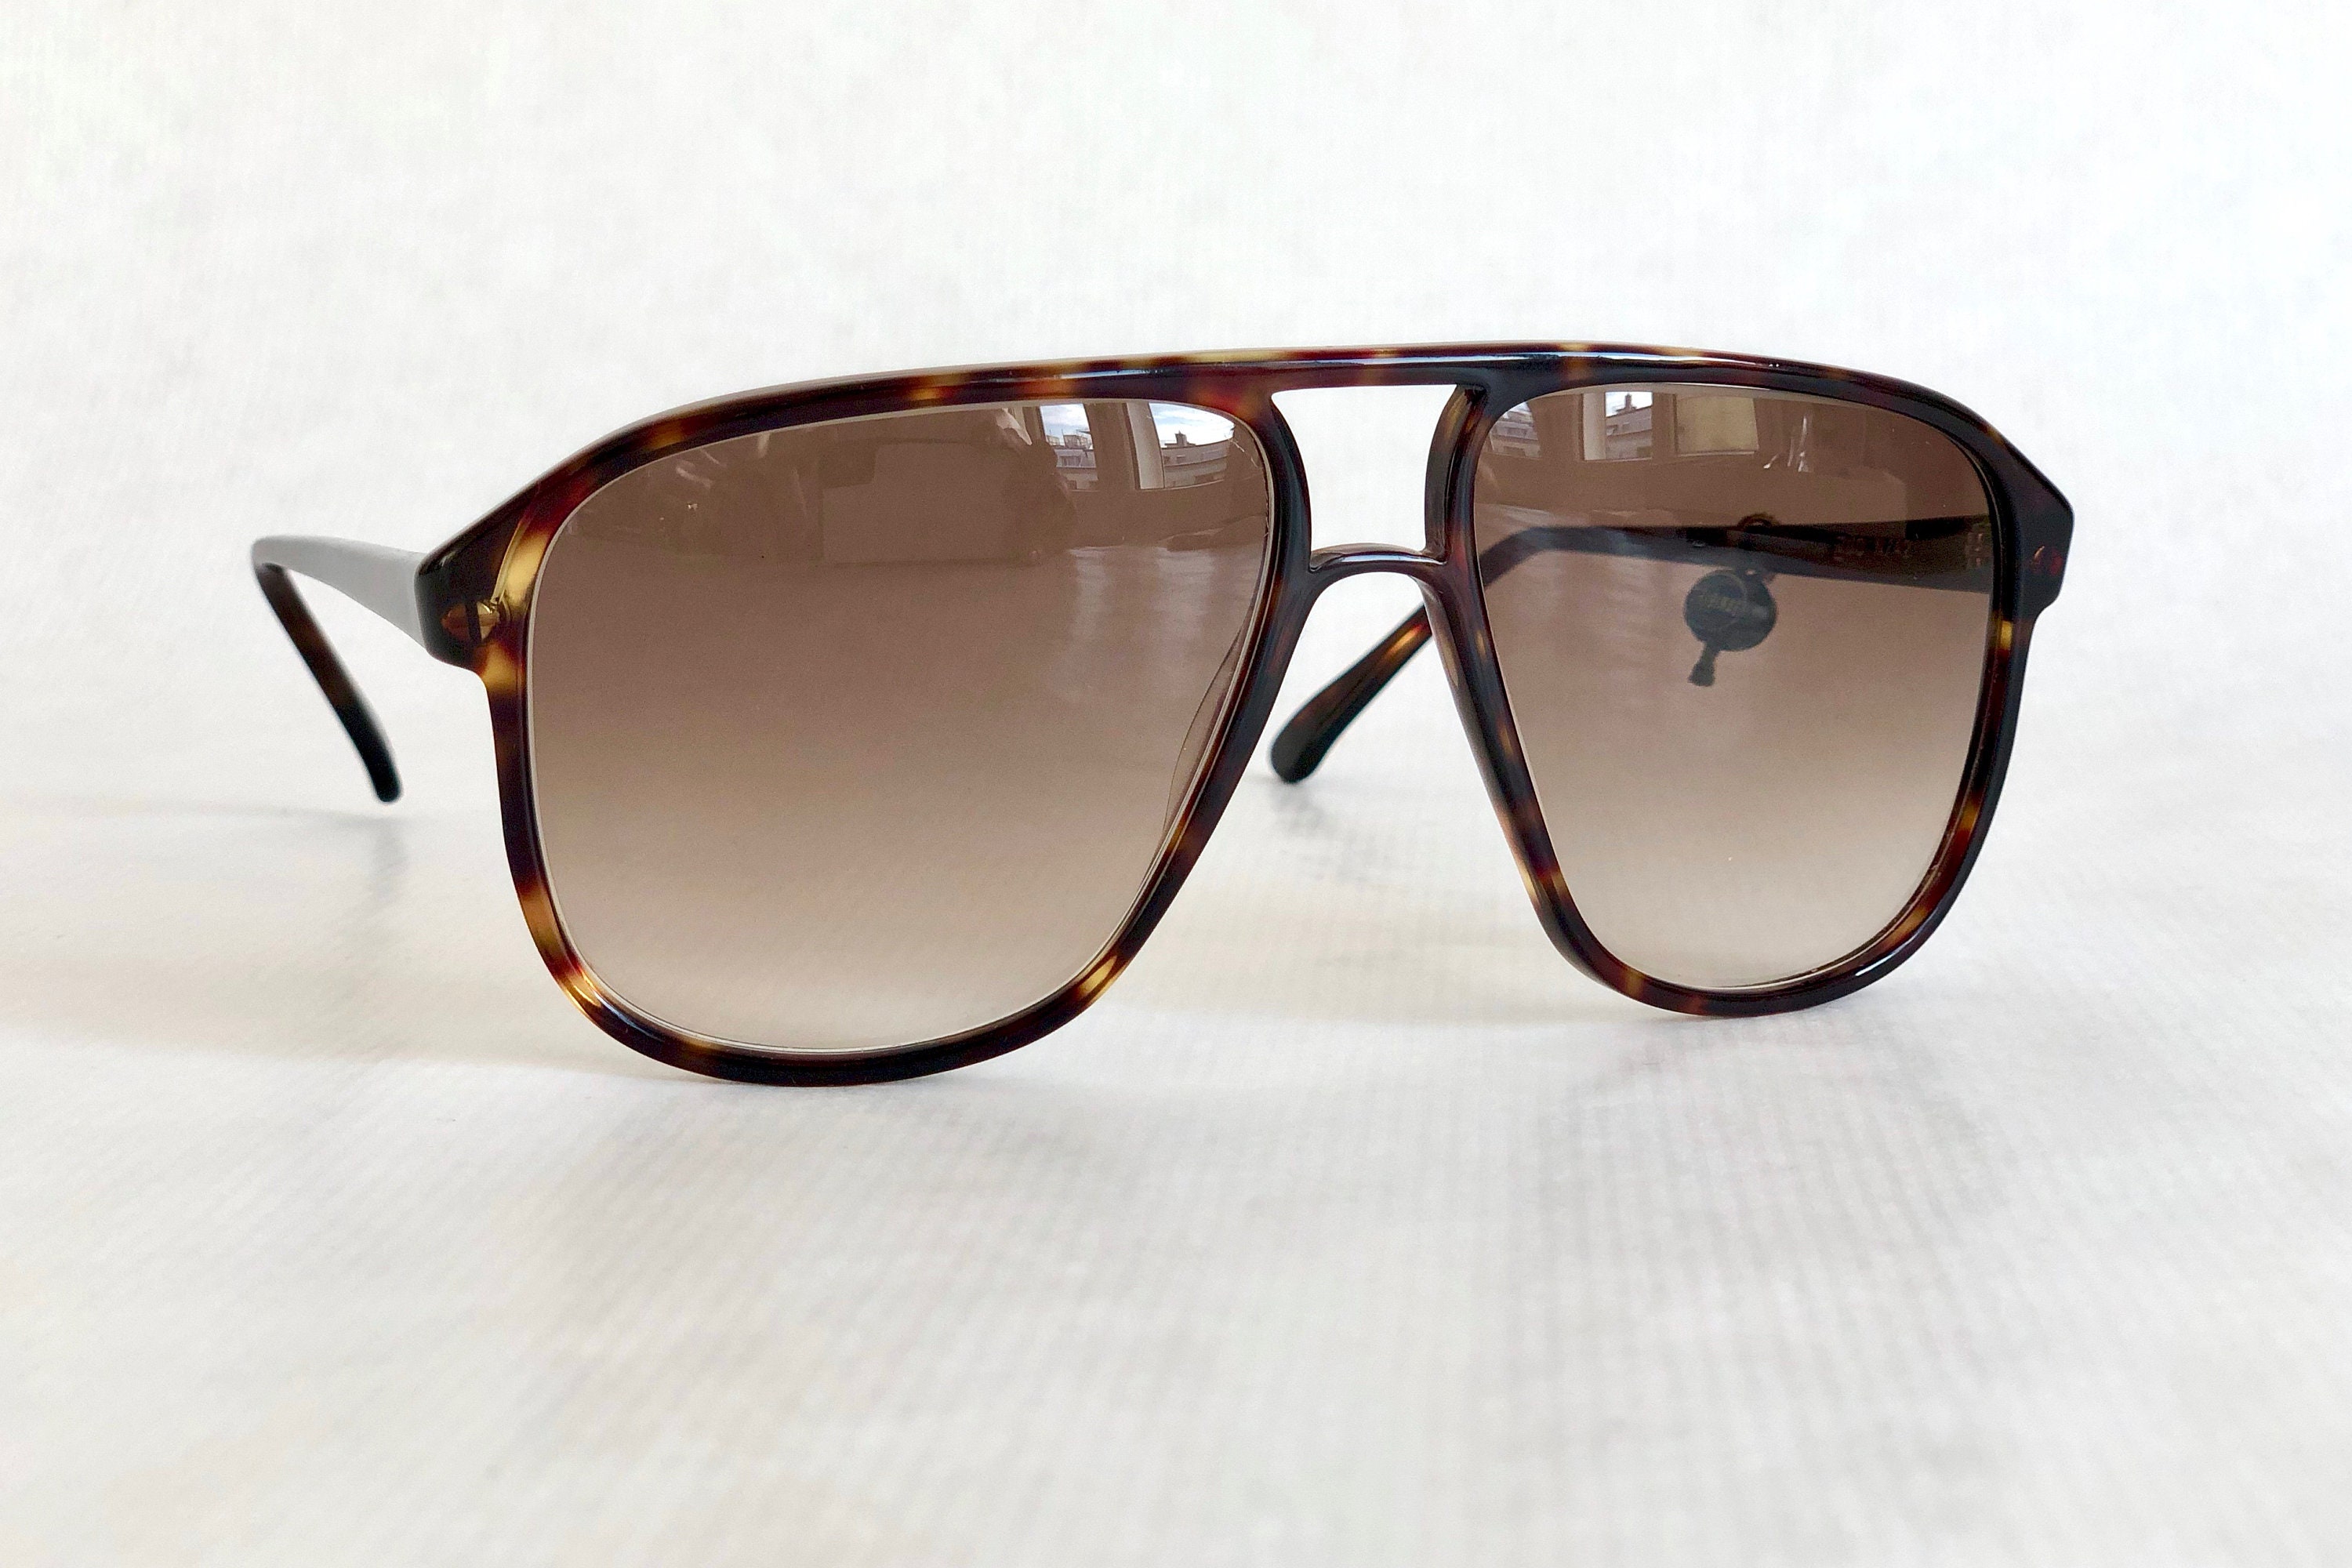 Lozza N42 Vintage Sunglasses – New Old Stock – Made in Italy